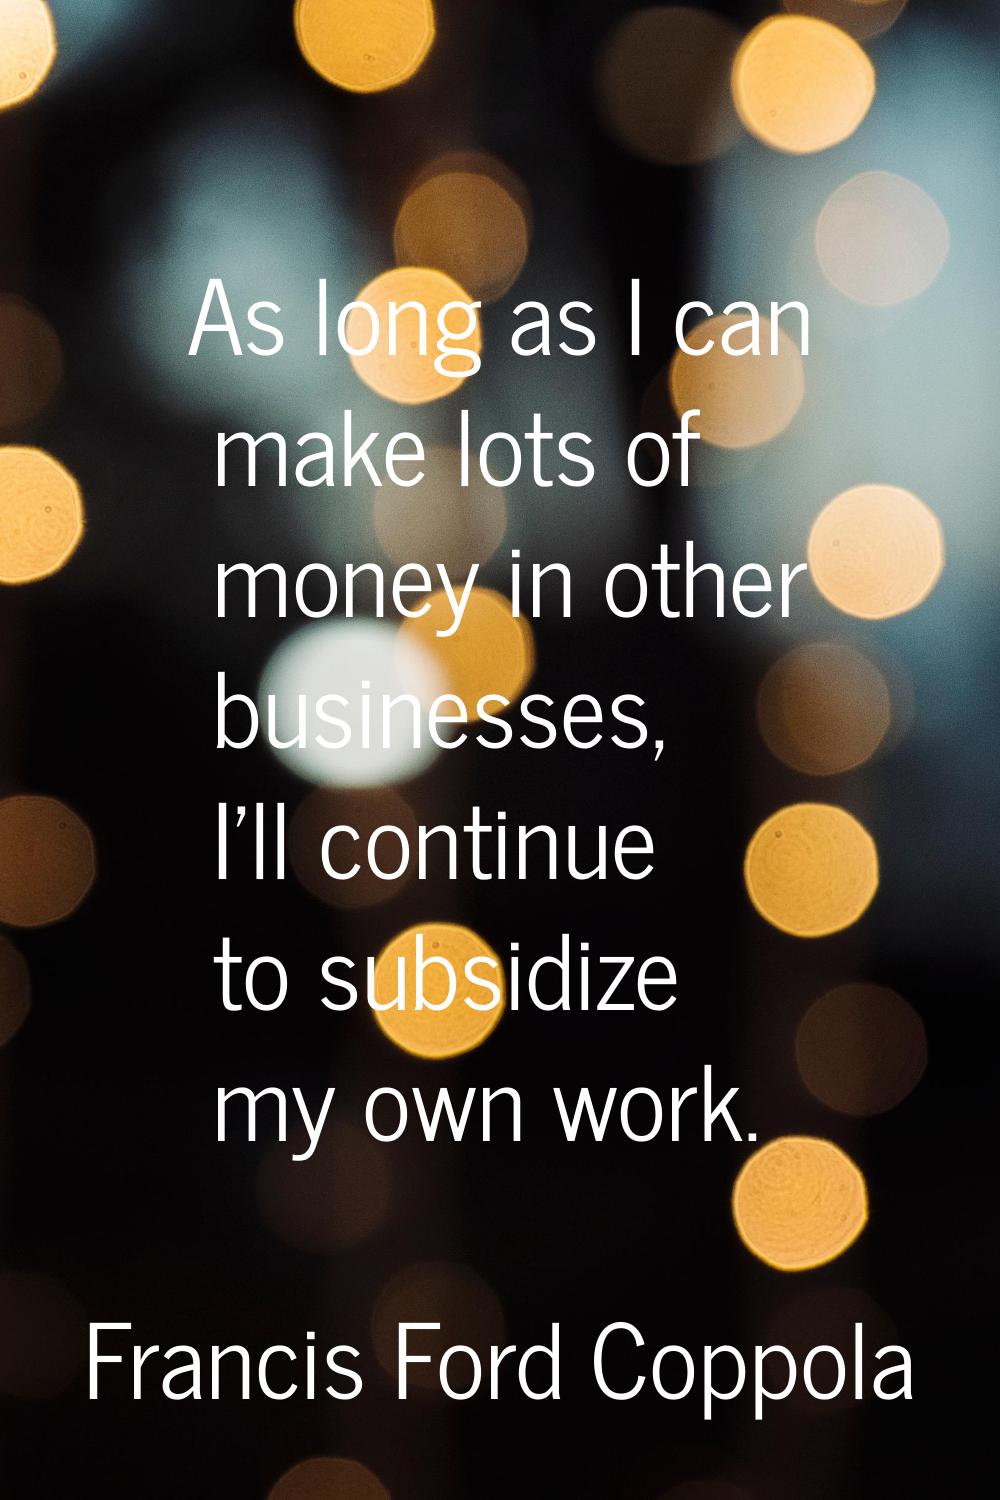 As long as I can make lots of money in other businesses, I'll continue to subsidize my own work.